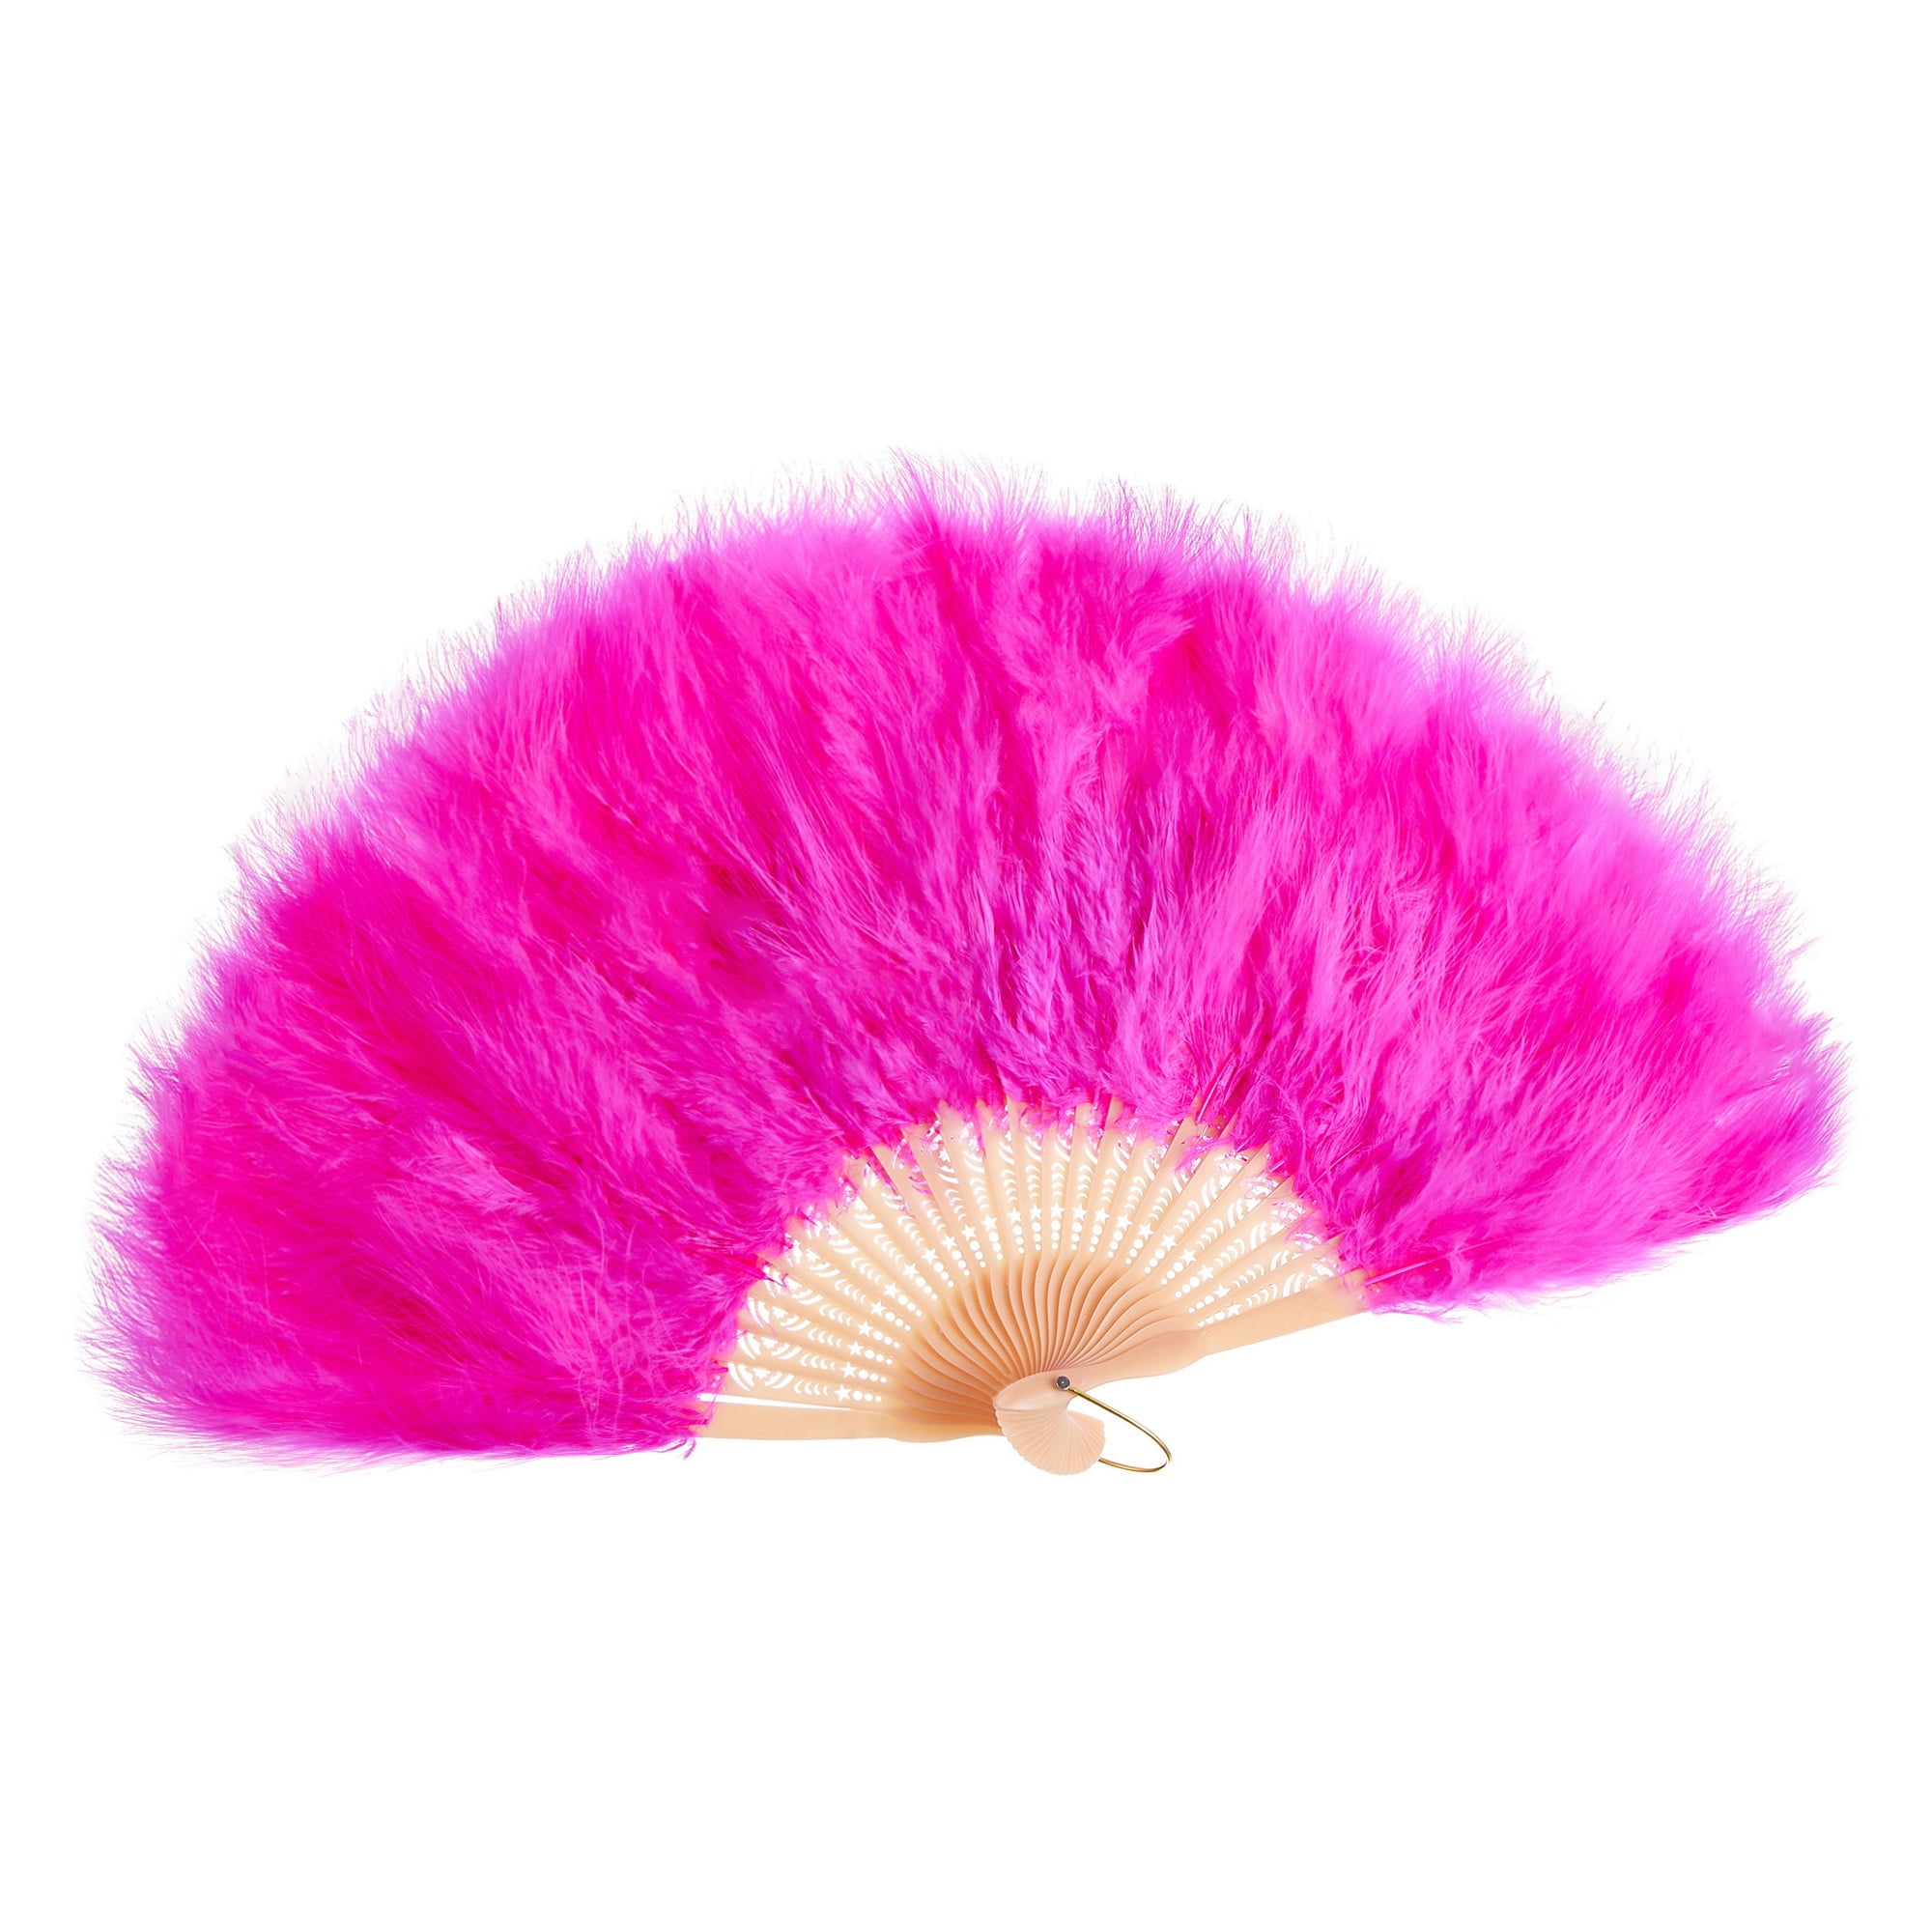 Sprifallbaby Feather Fan, 1920s Vintage Foldable Fan, Lightweight feather  Fans for Burlesque, Dancing Show 